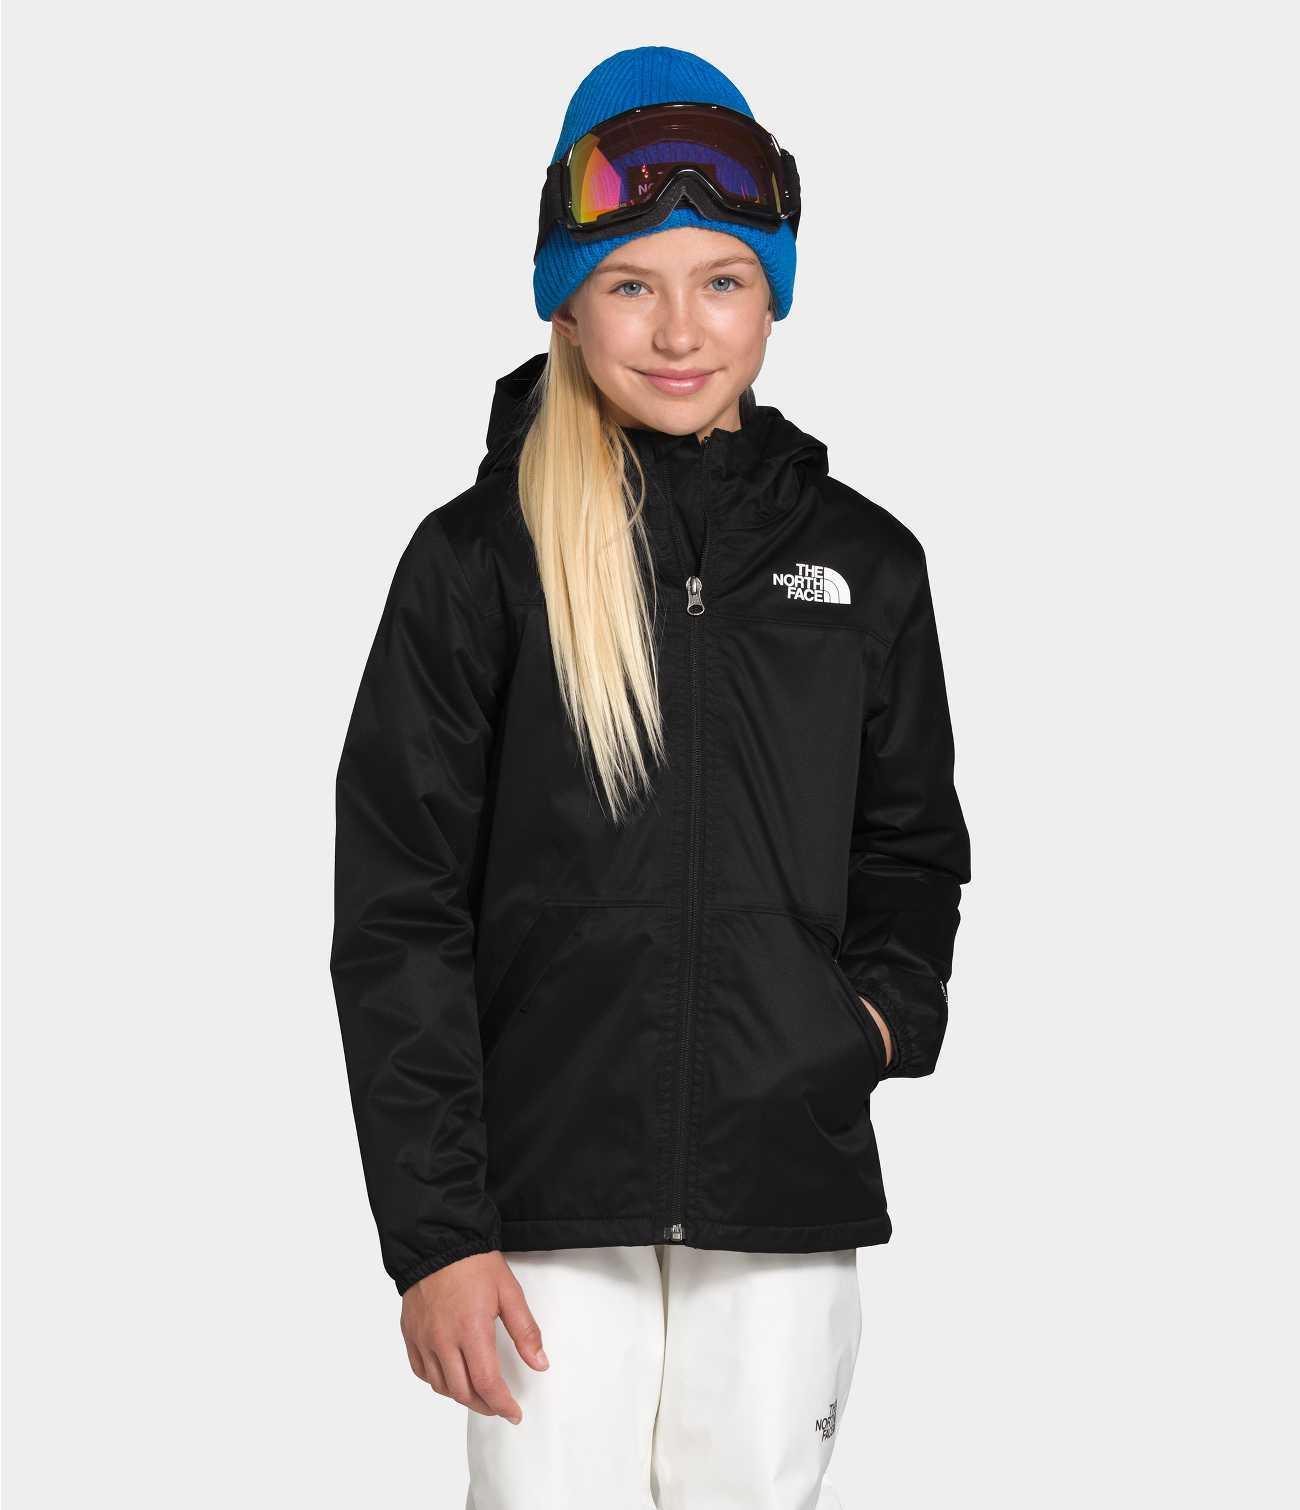 Shop Kids' | The North Face | The North Face Renewed